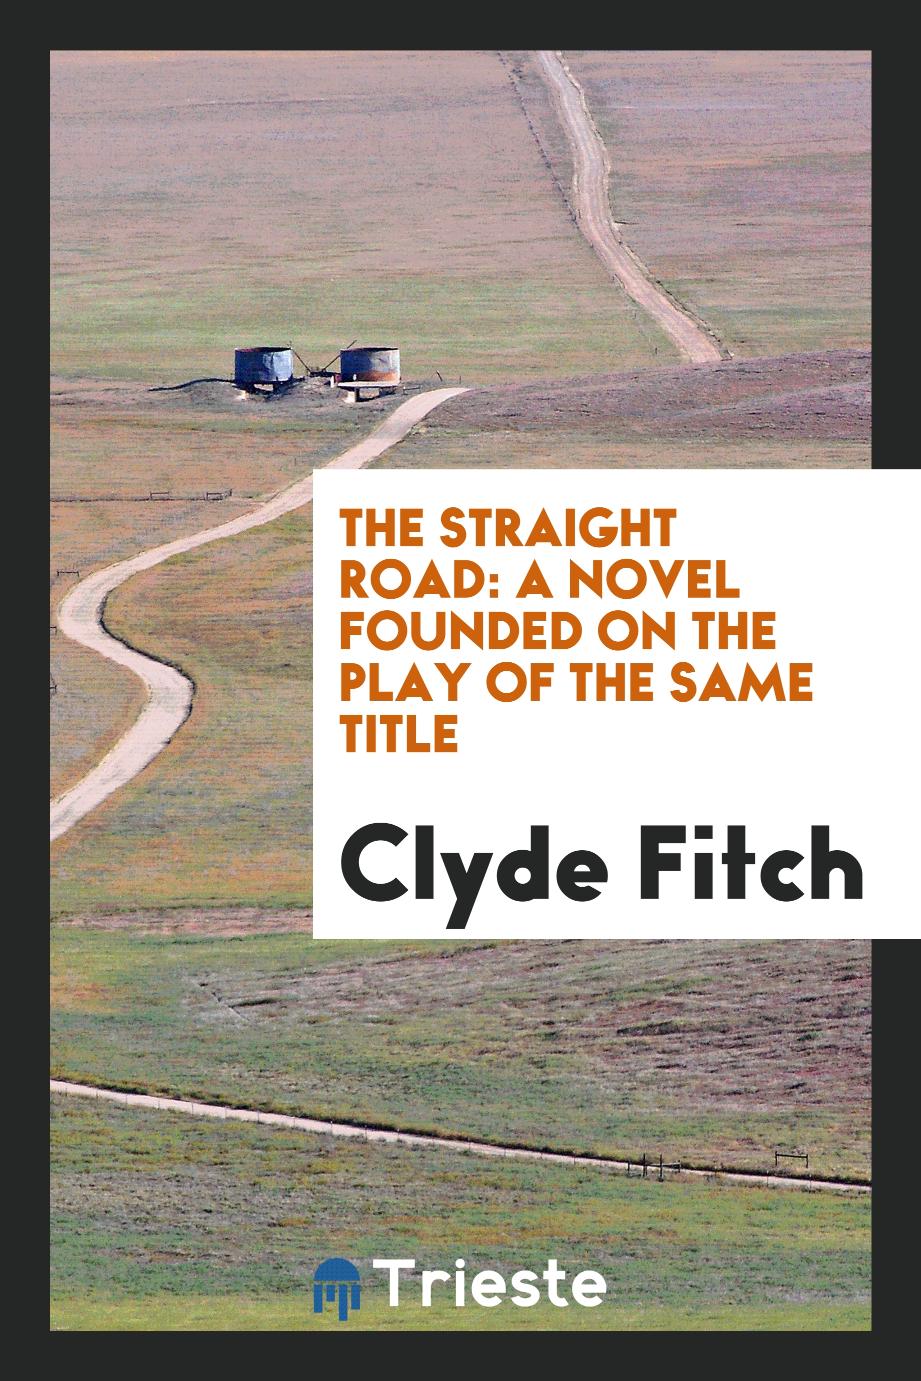 The Straight Road: A Novel Founded on the Play of the Same Title